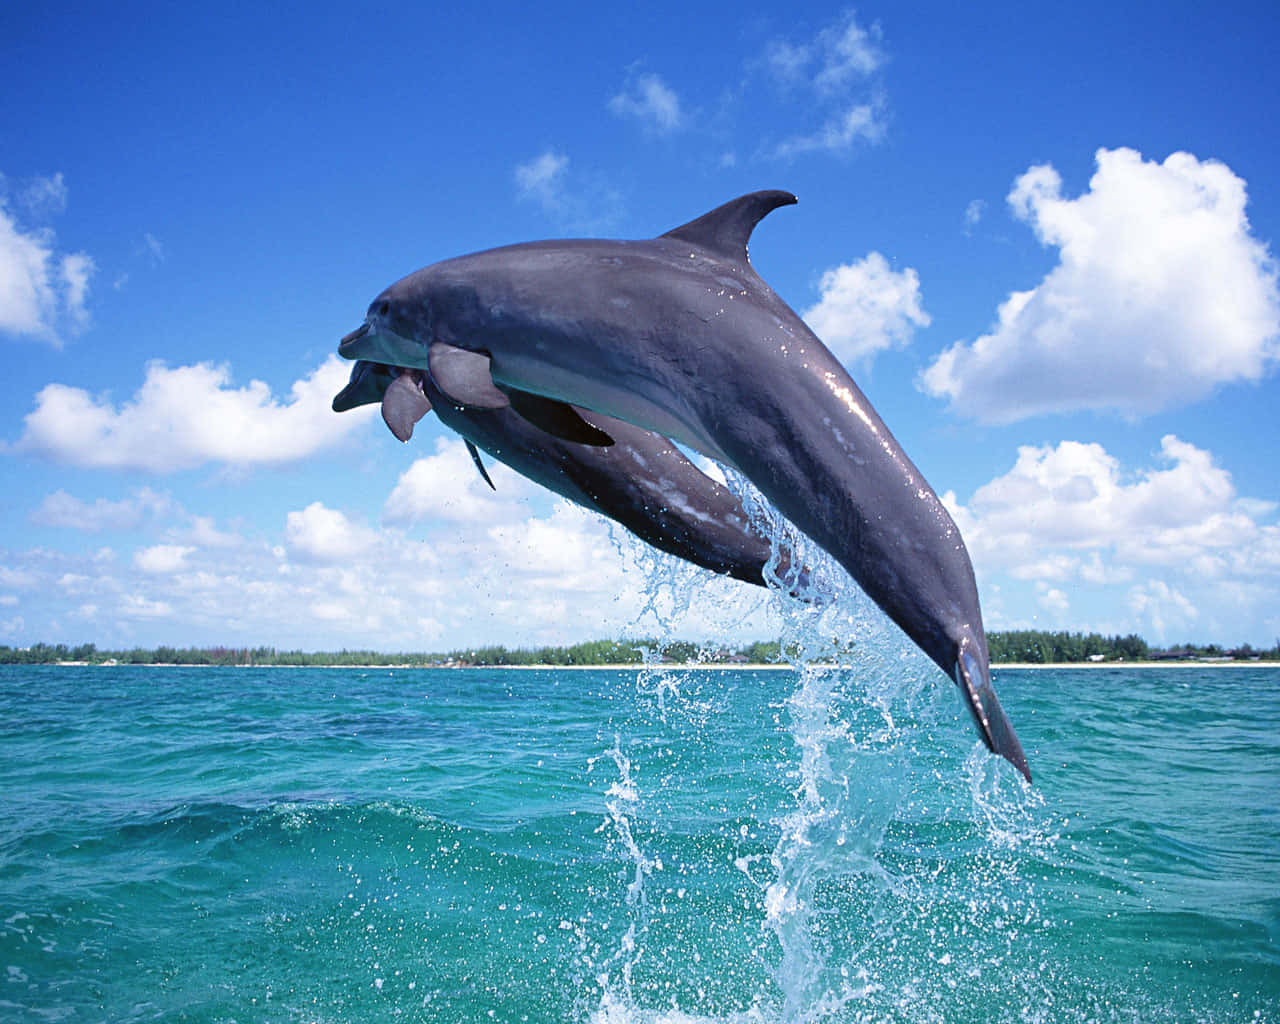 Swimming With Dolphins - An Unforgettable Experience"